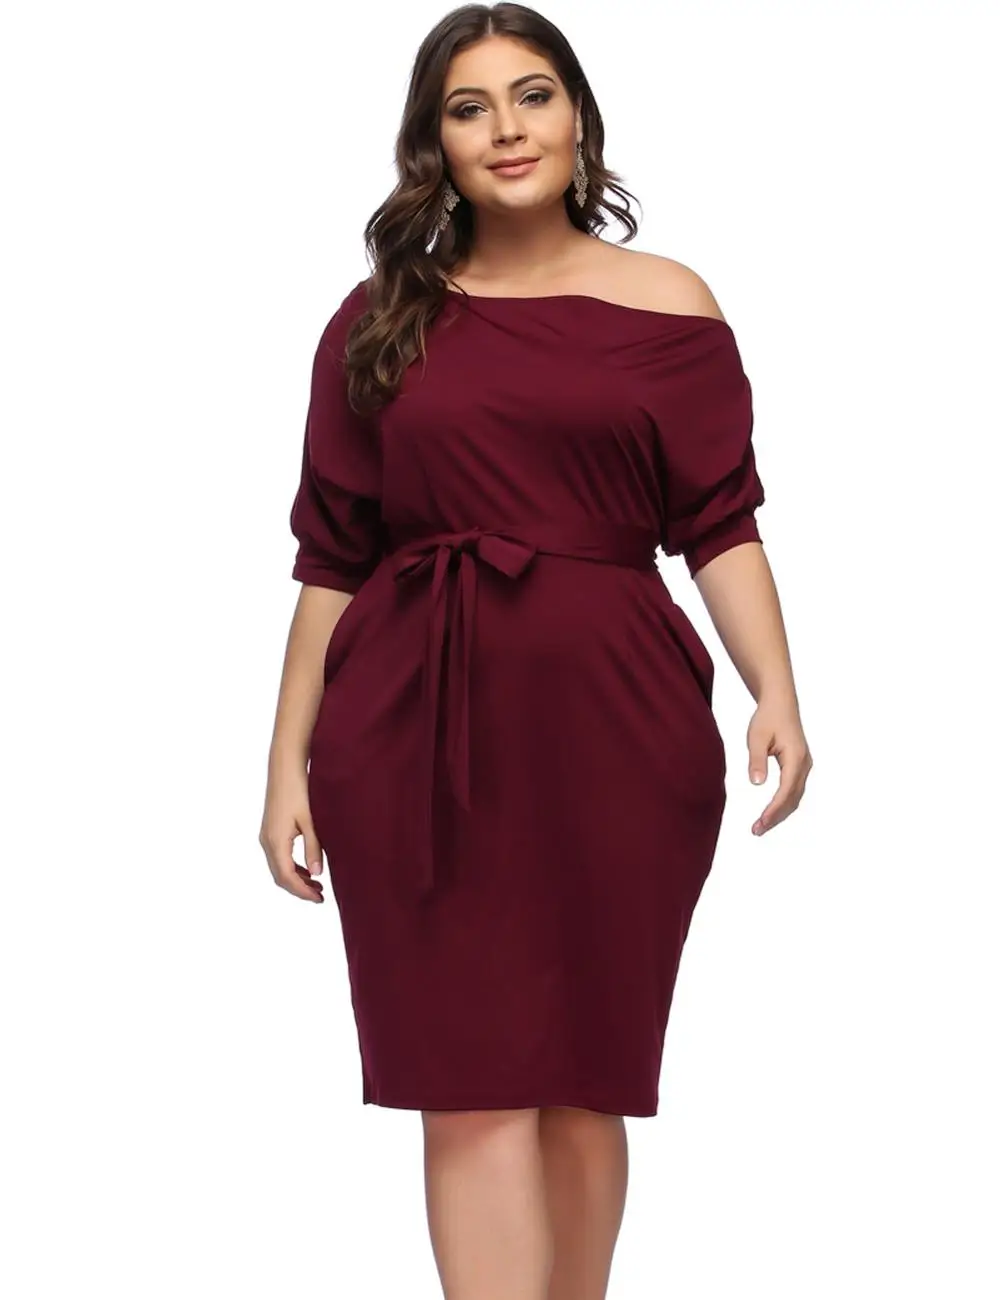 

Manufacturer Price Inclined Shoulder Plus Size Evening Dress Bodycon For Fat Women, As shown